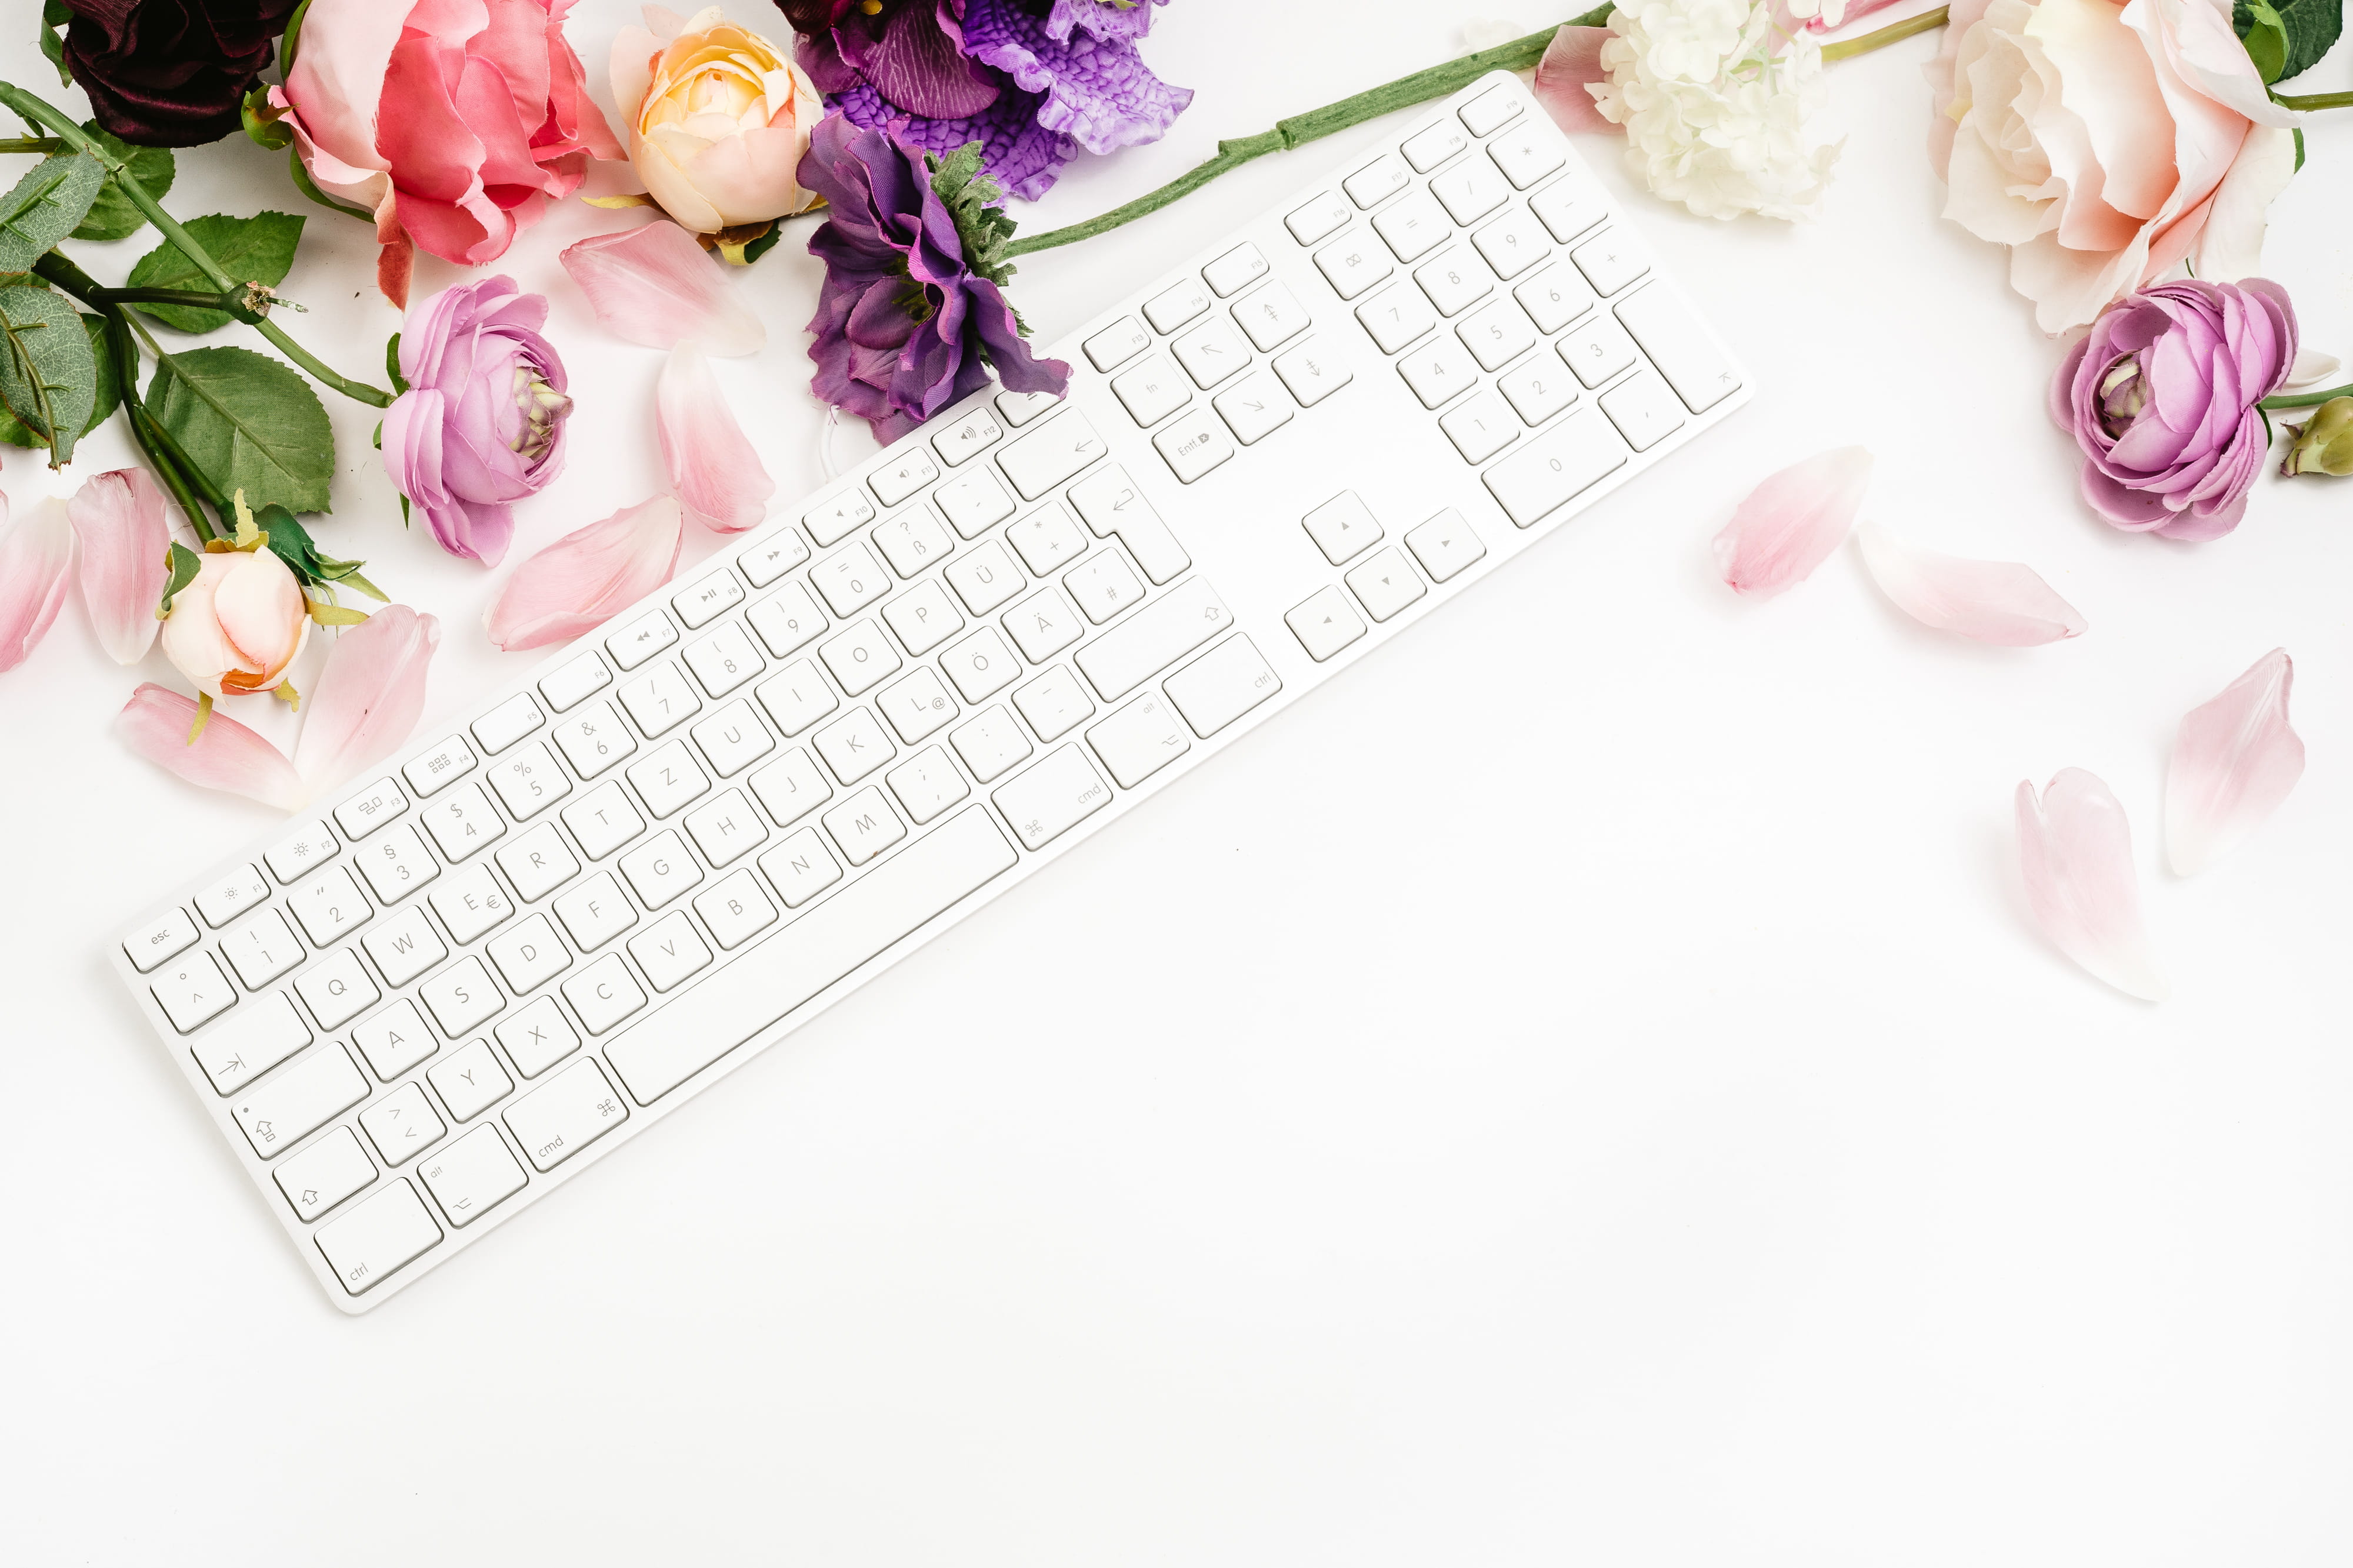 Flat lay with keyboard and flowers, background, blog, business